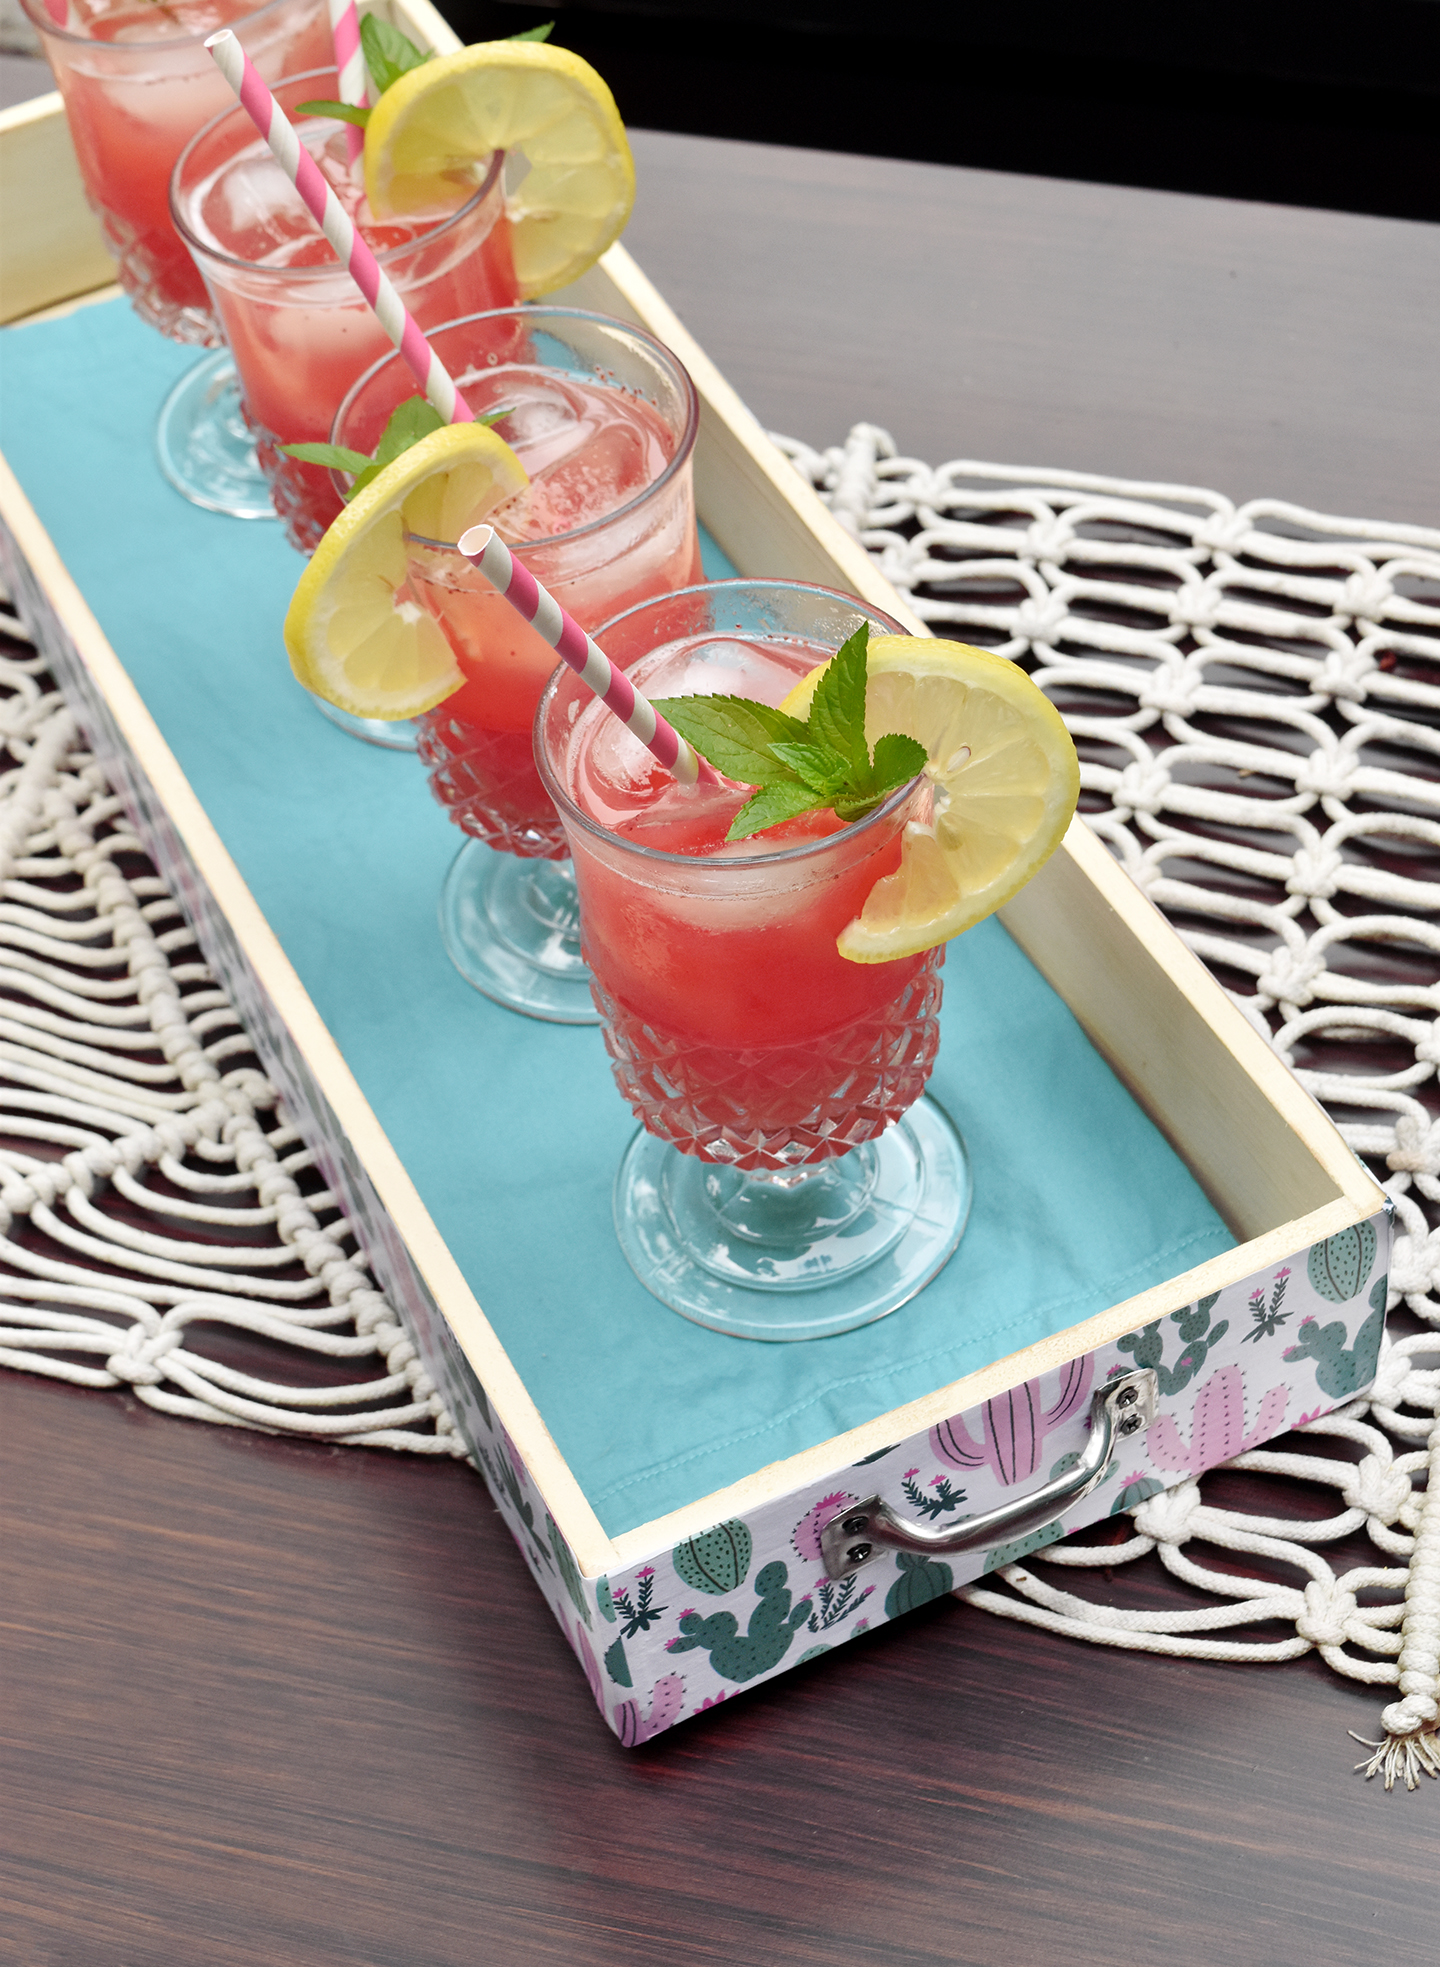 Taste of Summer: Easy DIY Serving Tray... Plus A Delicious Mocktail Recipe! /// By Design Fixation #diy #tray #mocktail